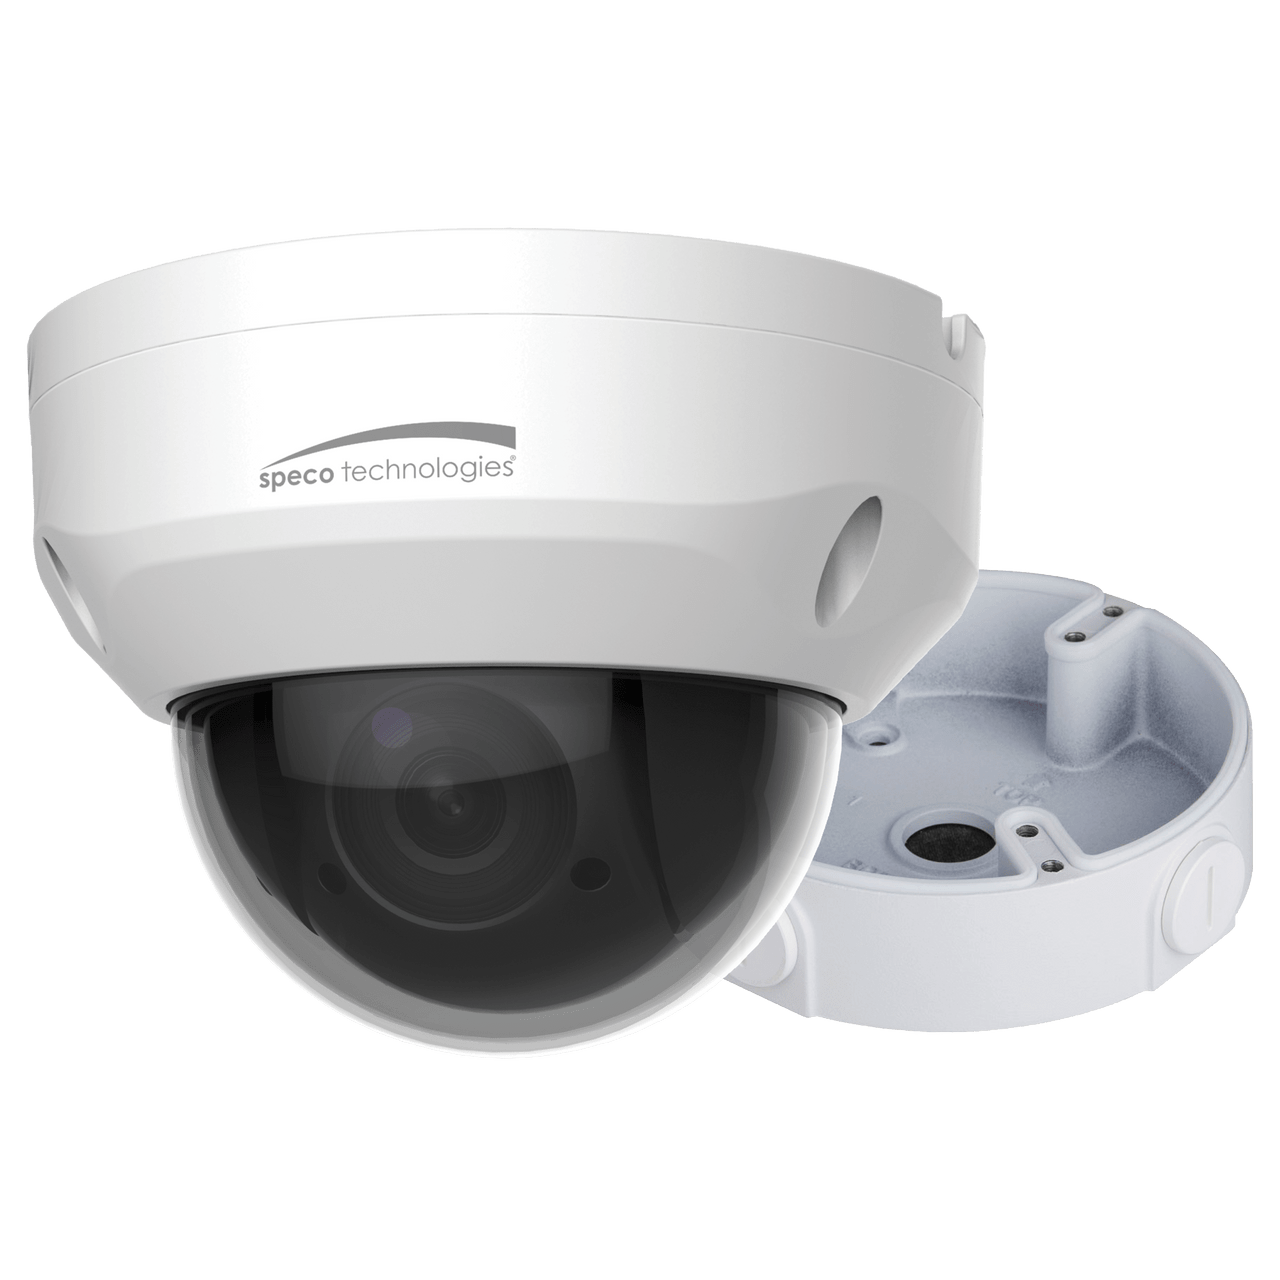 Speco Technologies O4P4X 4MP 4x Indoor/Outdoor IP PTZ Camera, 2.7-11mm lens, Included Junction Box, White Housing (O4P4X)